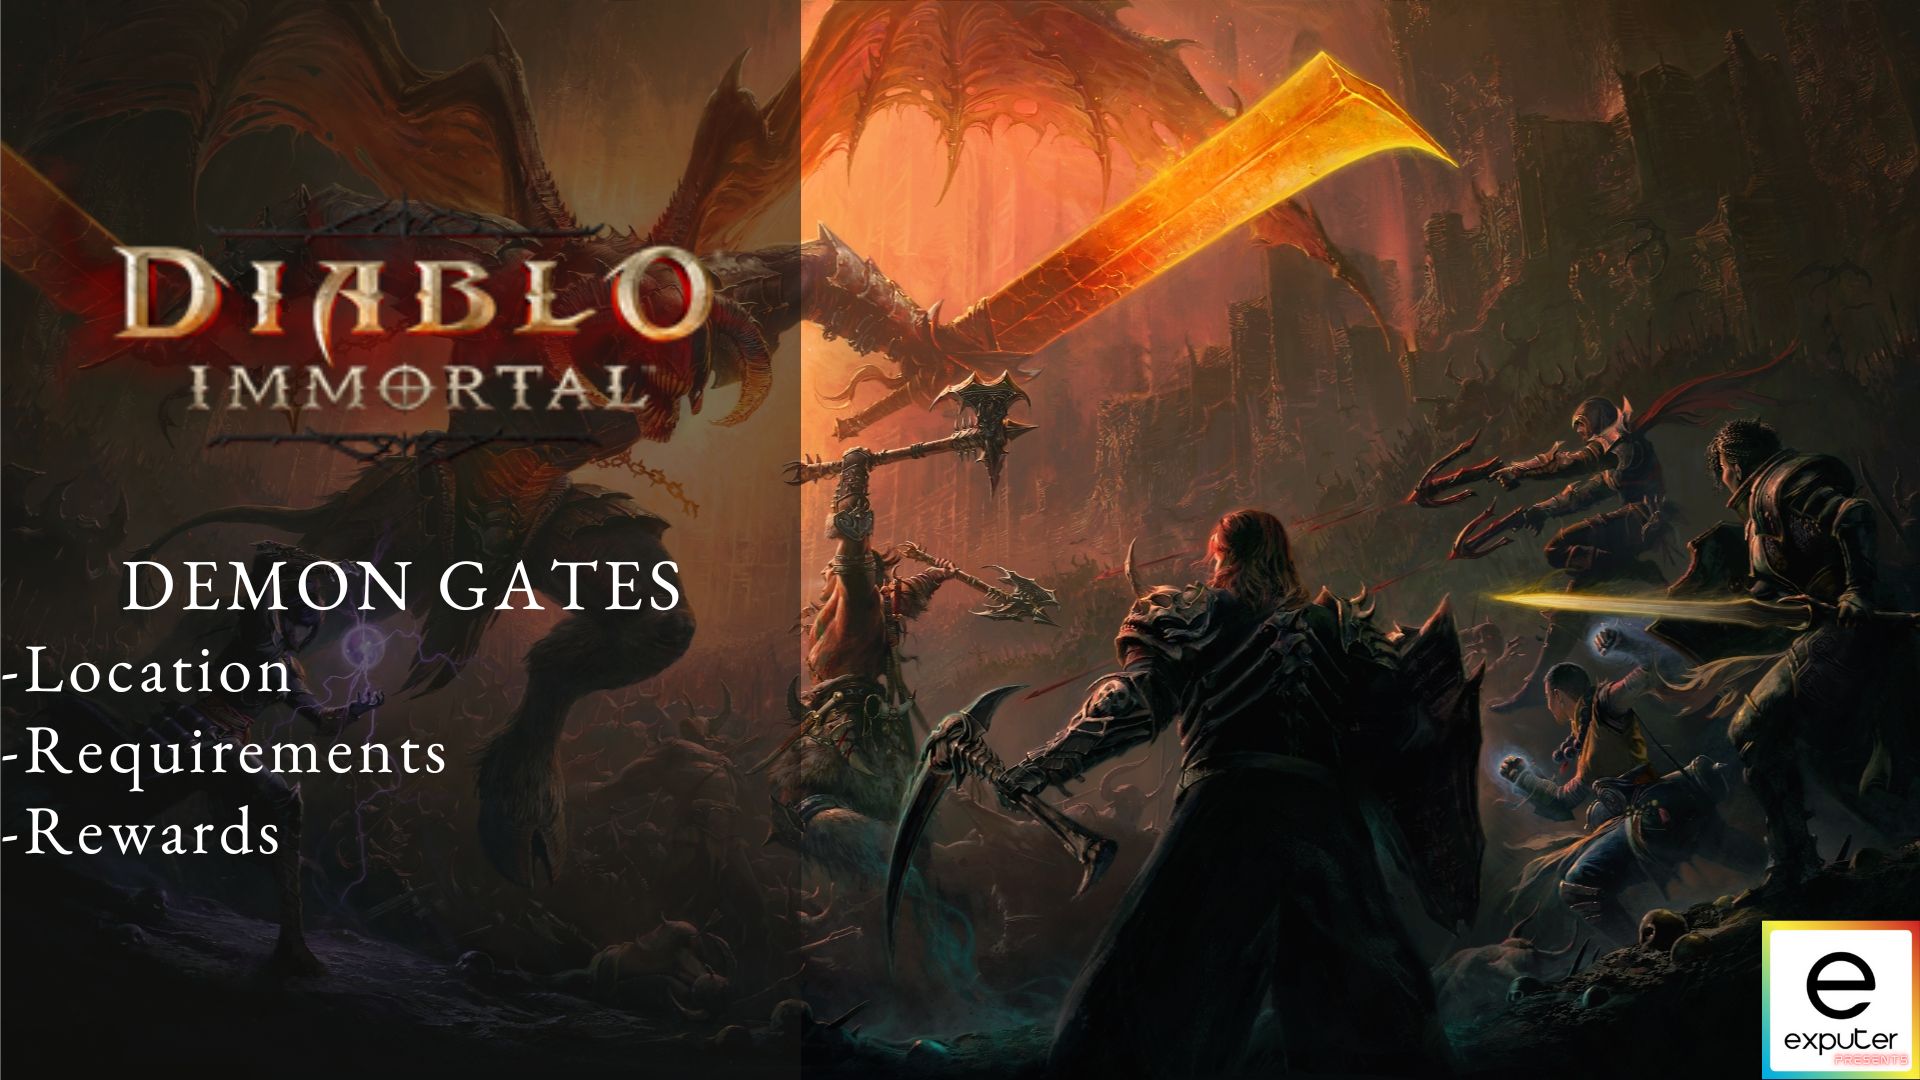 blizzard responds to accusations that diablo: immortal is a reskin